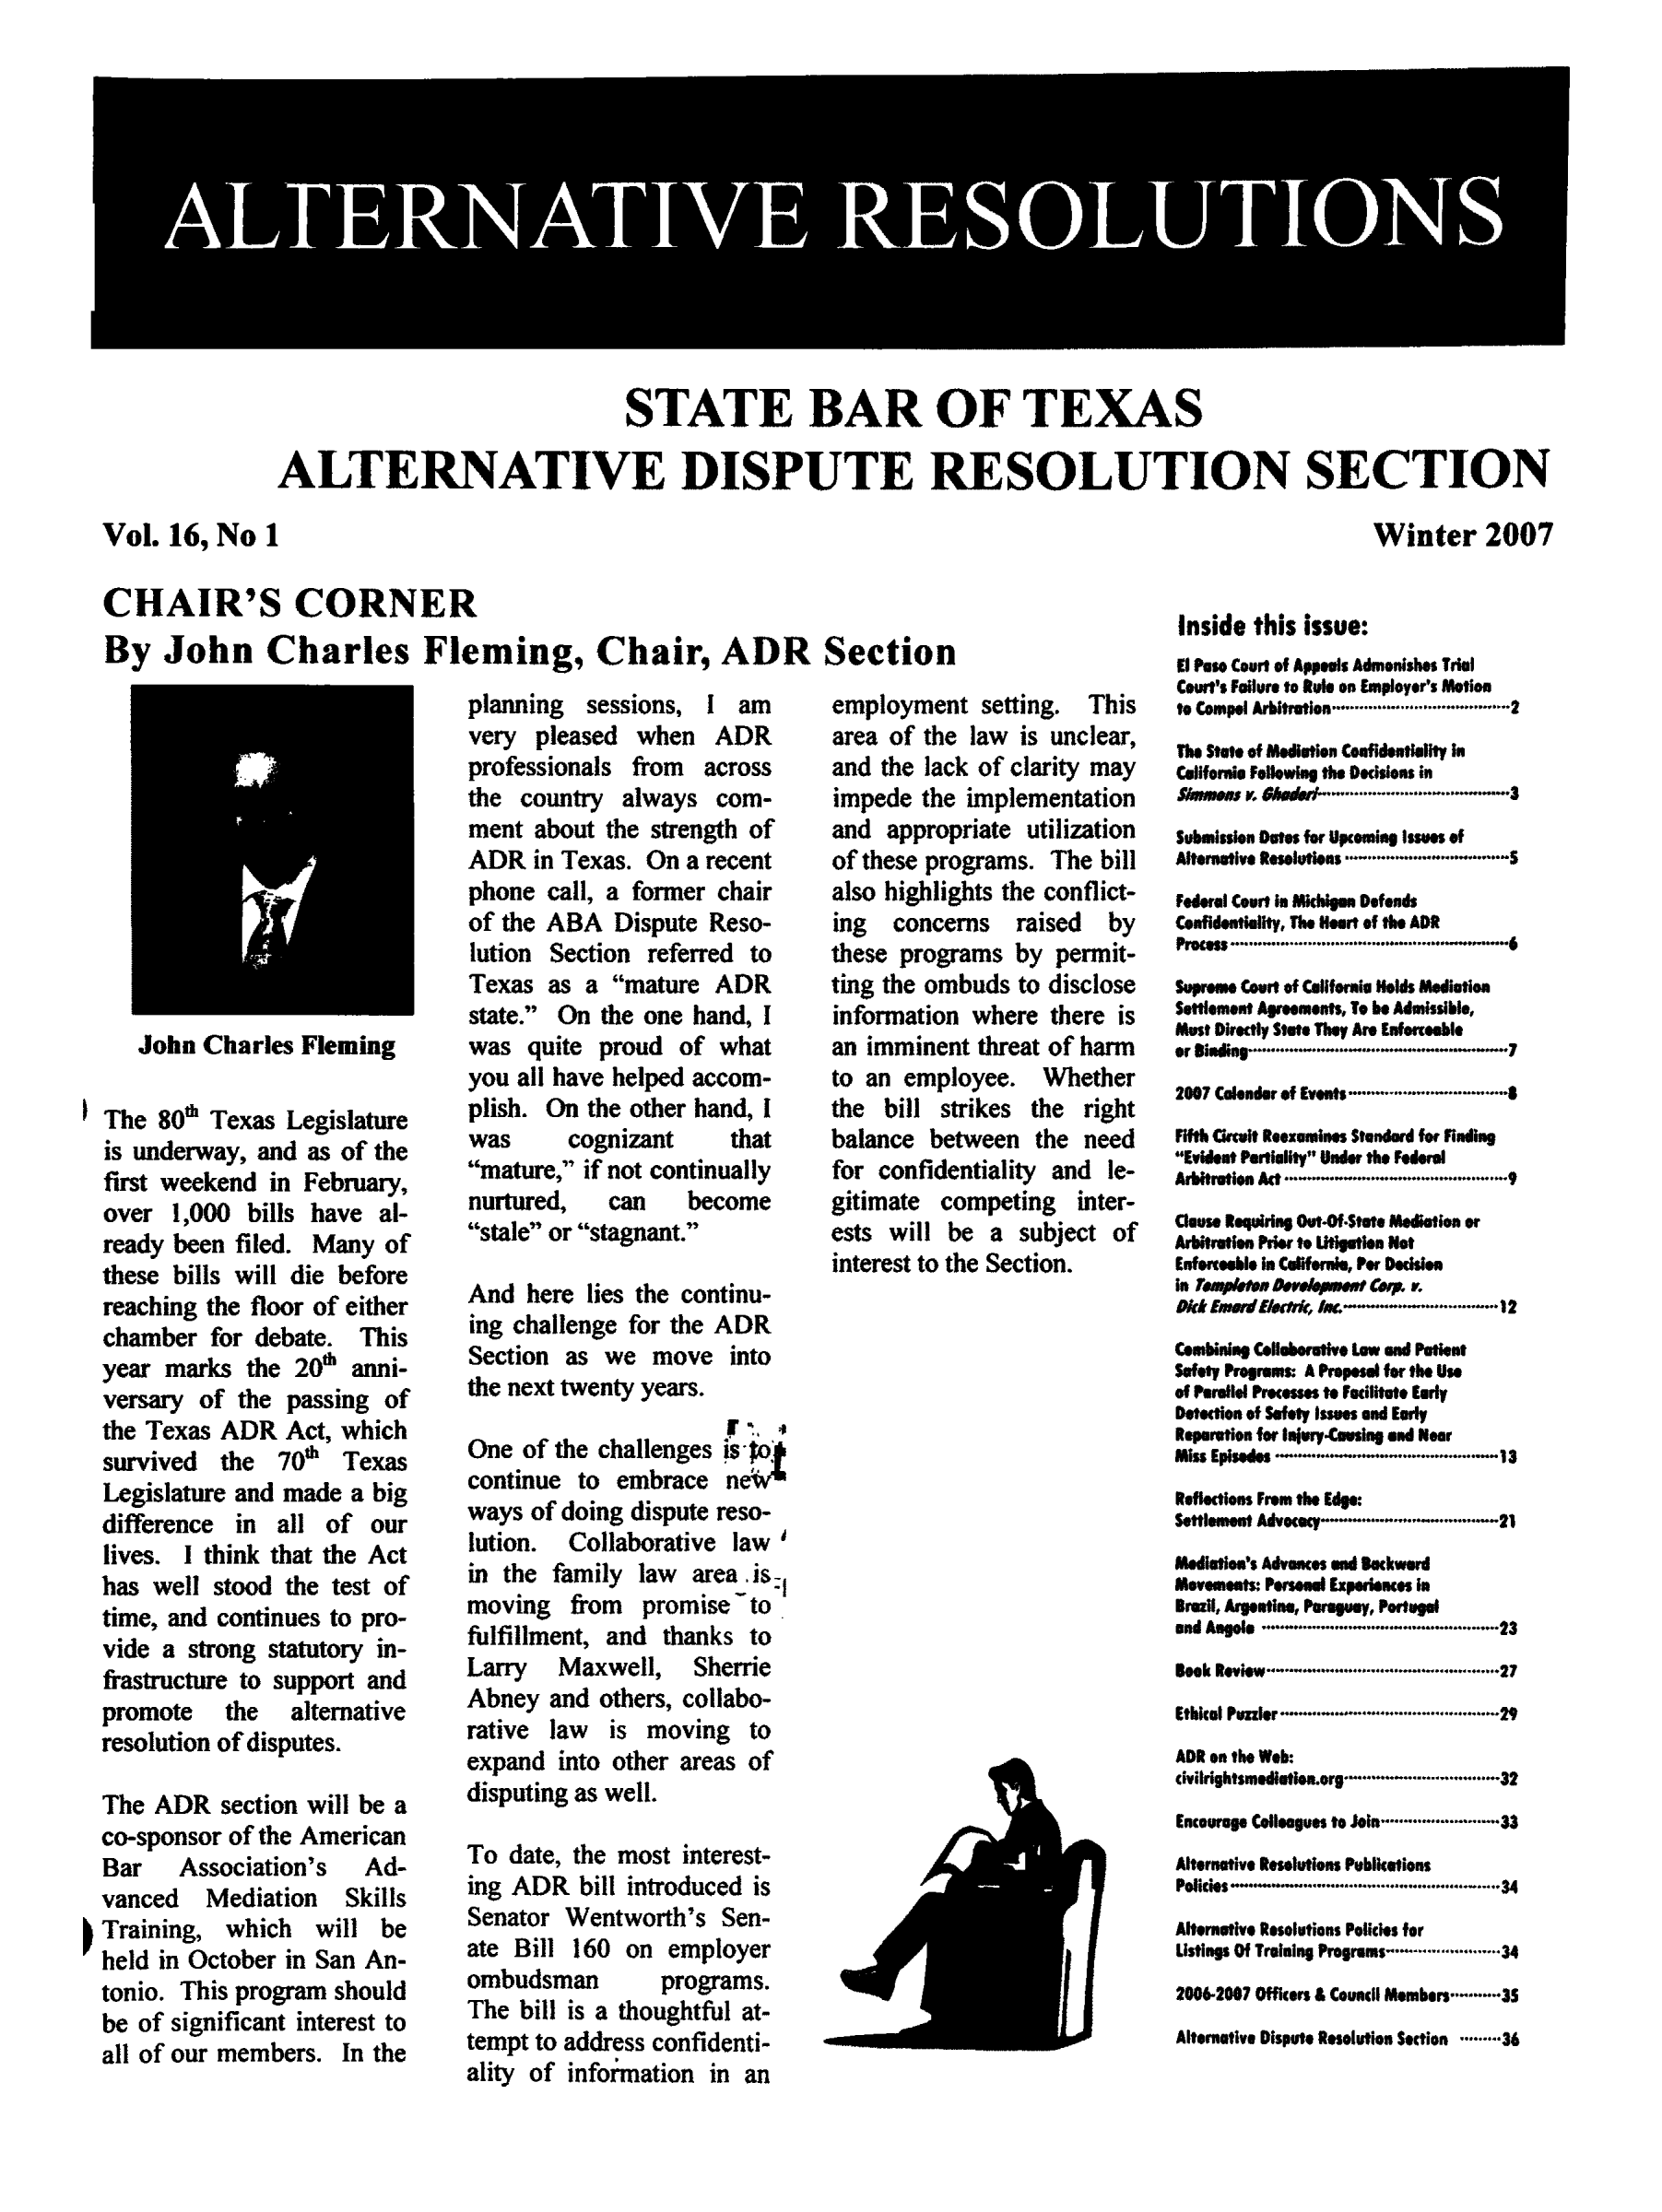 handle is hein.barjournals/altresolut0016 and id is 1 raw text is: STATE BAR OF TEXAS
ALTERNATIVE DISPUTE RESOLUTION SECTION

Winter 2007

CHAIR'S CORNER
By John Charles Fleming, Chair, ADR Section

John Charles Fleming

The 80'h Texas Legislature
is underway, and as of the
first weekend in February,
over 1,000 bills have al-
ready been filed. Many of
these bills will die before
reaching the floor of either
chamber for debate. This
year marks the 200 anni-
versary of the passing of
the Texas ADR Act, which
survived the 70& Texas
Legislature and made a big
difference in all of our
lives. I think that the Act
has well stood the test of
time, and continues to pro-
vide a strong statutory in-
frastructure to support and
promote  the  alternative
resolution of disputes.
The ADR section will be a
co-sponsor of the American
Bar   Association's  Ad-
vanced  Mediation  Skills
Training, which will be
held in October in San An-
tonio. This program should
be of significant interest to
all of our members. In the

planning sessions, I am
very pleased when ADR
professionals from across
the country always com-
ment about the strength of
ADR in Texas. On a recent
phone call, a former chair
of the ABA Dispute Reso-
lution Section referred to
Texas as a mature ADR
state. On the one hand, I
was quite proud of what
you all have helped accom-
plish. On the other hand, I
was     cognizant   that
mature, if not continually
nurtured,  can   become
stale or stagnant.
And here lies the continu-
ing challenge for the ADR
Section as we move into
the next twenty years.
One of the challenges !sot'
continue to embrace ne
ways of doing dispute reso-
lution. Collaborative law
in the family law area. is-
moving from promise to
fulfillment, and thanks to
Larry  Maxwell,  Sherrie
Abney and others, collabo-
rative law is moving to
expand into other areas of
disputing as well.
To date, the most interest-
ing ADR bill introduced is
Senator Wentworth's Sen-
ate Bill 160 on employer
ombudsman      programs.
The bill is a thoughtful at-
tempt to address confidenti-
ality of infor~mation in an

employment setting. This
area of the law is unclear,
and the lack of clarity may
impede the implementation
and appropriate utilization
of these programs. The bill
also highlights the conflict-
ing  concerns raised  by
these programs by permit-
ting the ombuds to disclose
information where there is
an imminent threat of harm
to an employee. Whether
the bill strikes the right
balance between the need
for confidentiality and le-
gitimate competing inter-
ests will be a subject of
interest to the Section.

Inside this issue:
El Paso Court of Appeals Admonishes Trial
Cour's Failure to Rul on Employer's Motion
to Compel Arbitration..................... 2
The State of Mediation Confidentiality In
Celifornie Following the Decisions in
Srnas v hmded.-..............................--3
Submission Otes for Upcoming Issues of
Alterntive Resolutions ..........  ..... .
Federal Court In Michigan Defends
Confidentiality, The Heart of the ADR
Process.................. ... . ........6
Supreme Court of California Holds Mediation
Settlement Agreements, To be Admissible,
Must Directly State They Are Enforceble
or Binding........................ ....... 7
2007 Calender of Events...................
Fifth Cicuit Reexamines Standard for finding
Evident Partiality Under the Federal
ArbitrationA  ..................         9
Cluse Requiring Out-Of.Stete Medaton or
Arbitrotion Prier to Lfigation Not
Enferceable in Californie, Per Decision
In TeaPltC O*V.t , v.
Dkk EsnudEIM ~..-'         .......1
Combining Collaborative Law end Patenl
Safety Programs: A Propsail for the Use
of Parallel Processes to Facilitate Early
Detection of Safety Issues and Early
Reparafion for lnjurytCaing and Near
Miss Episodes   . .   ............................. 13
Reflections From the Edge:
Settlement A..o.cy21
Medial  's Advances end Backward
Movemeats: .Peon    Experiences in
Brazil, Argetine, Paragua, Portagal
and Angola...        ..    .   ............ 23
Beok Review.................      ...27
Ethical Puzzler.. ...  .   .   ............. 29
ADR on the Web:
civilrightsmedlatlon.org ...........................32
Encourage Colleagues to Join................ 33
Alternative Resolutions Publications
Policies.. .................................................. 34
Alternative Resolutions Policies for
Listings Of Training Programs ................ 34
2006-20W7 Officers £ Council Members......3S
Alternative Dispute Resolution Section....36

Vol. 16, No 1


